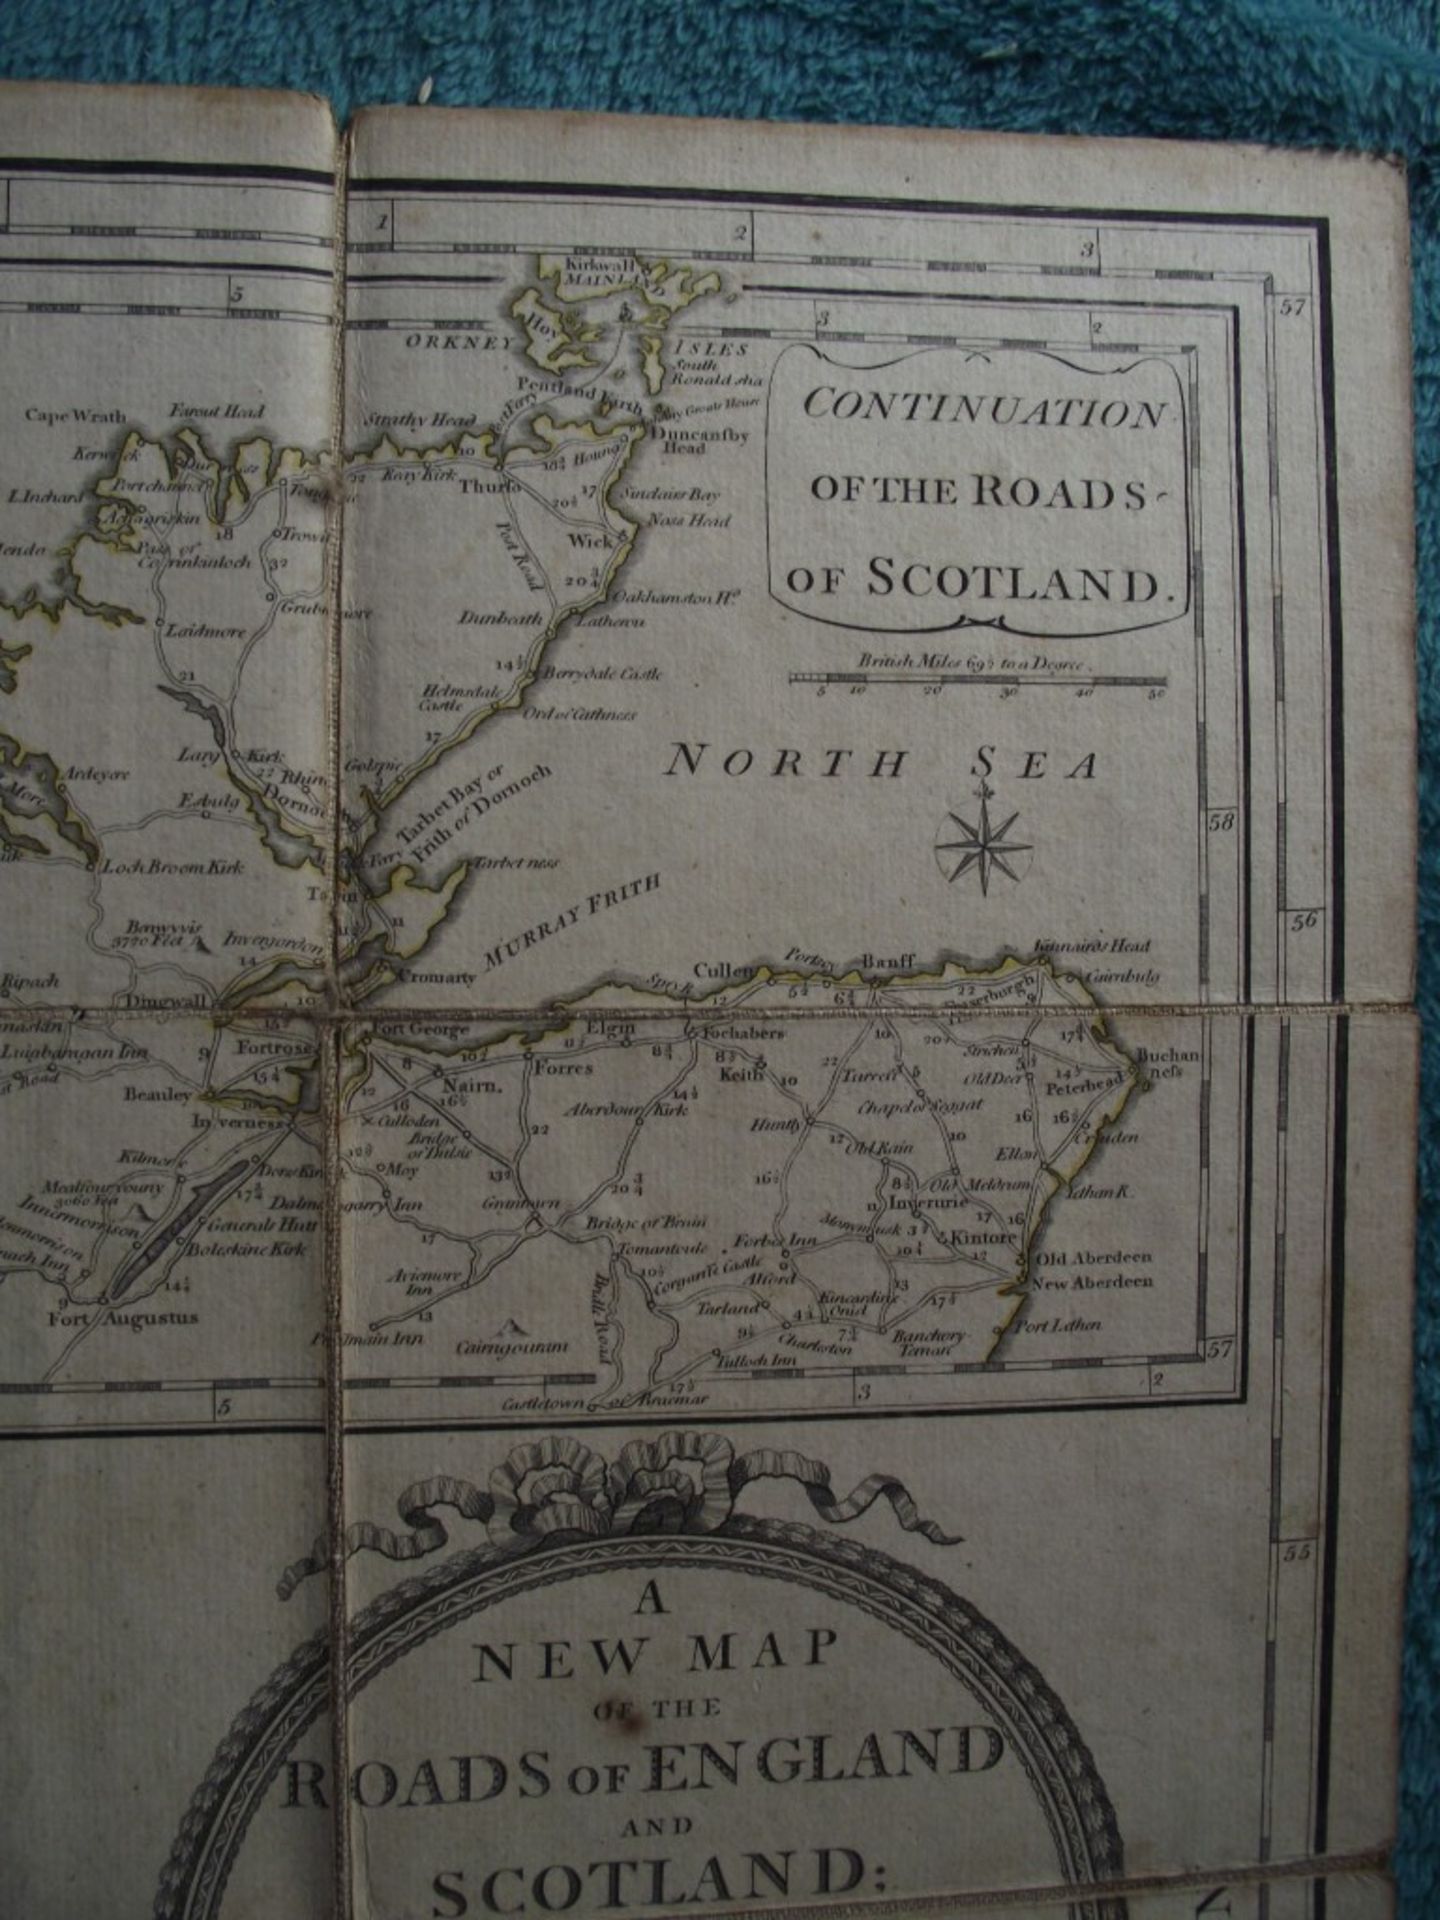 A New Map of The Roads of England and Scotland - Laurie & Whittle - 1794 - With Original Case - Image 10 of 32